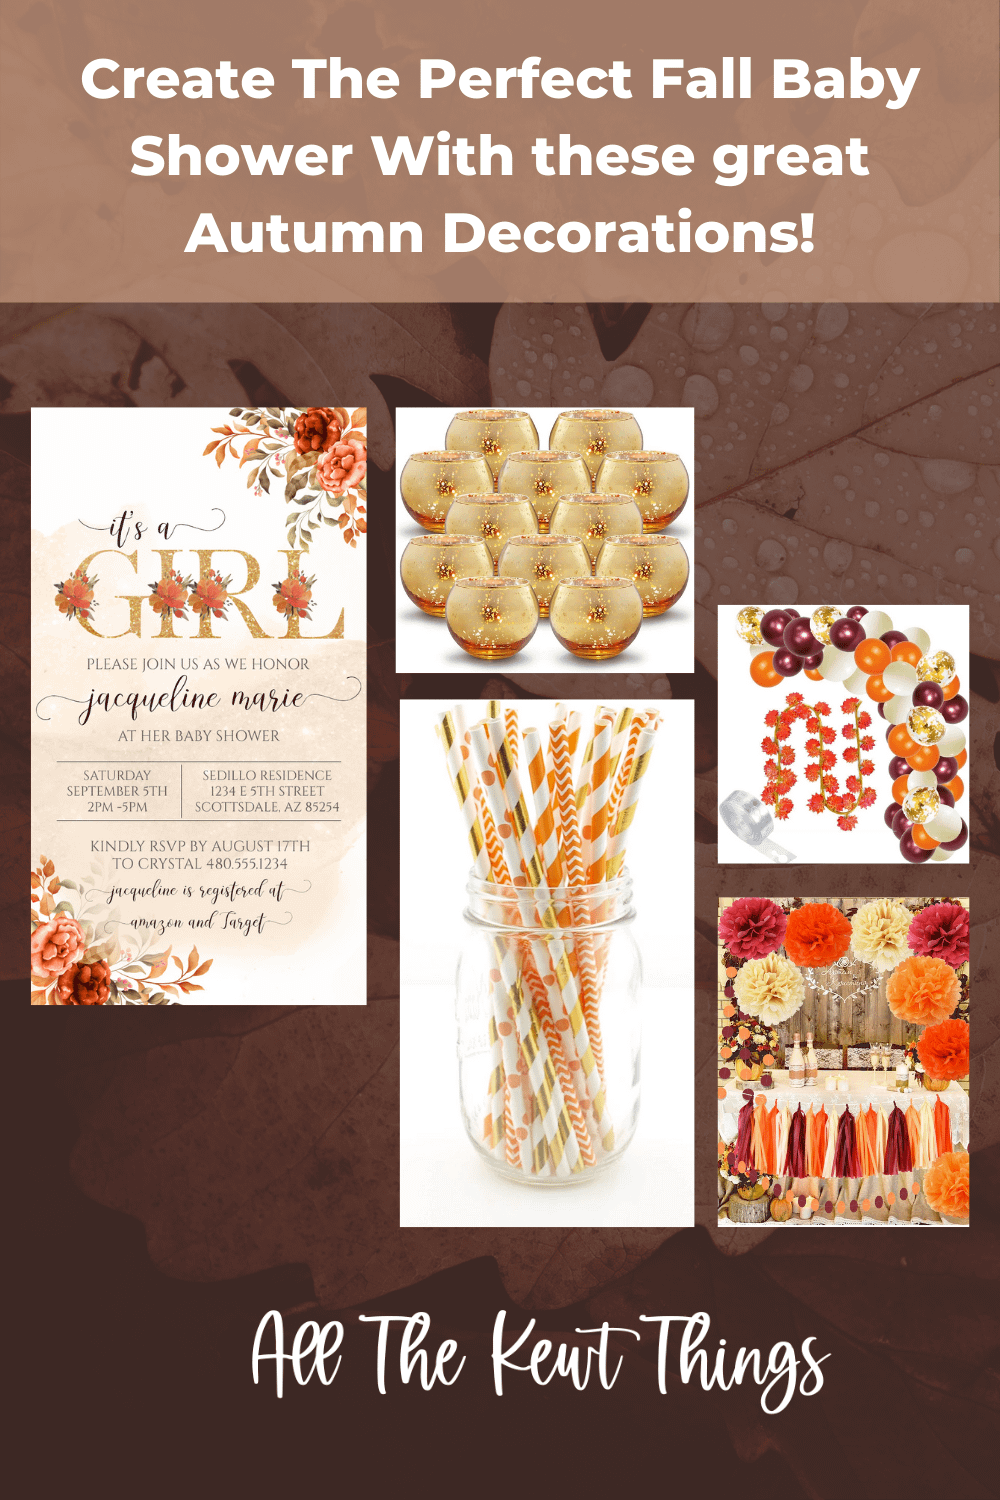 Create The Perfect Fall Baby Shower!